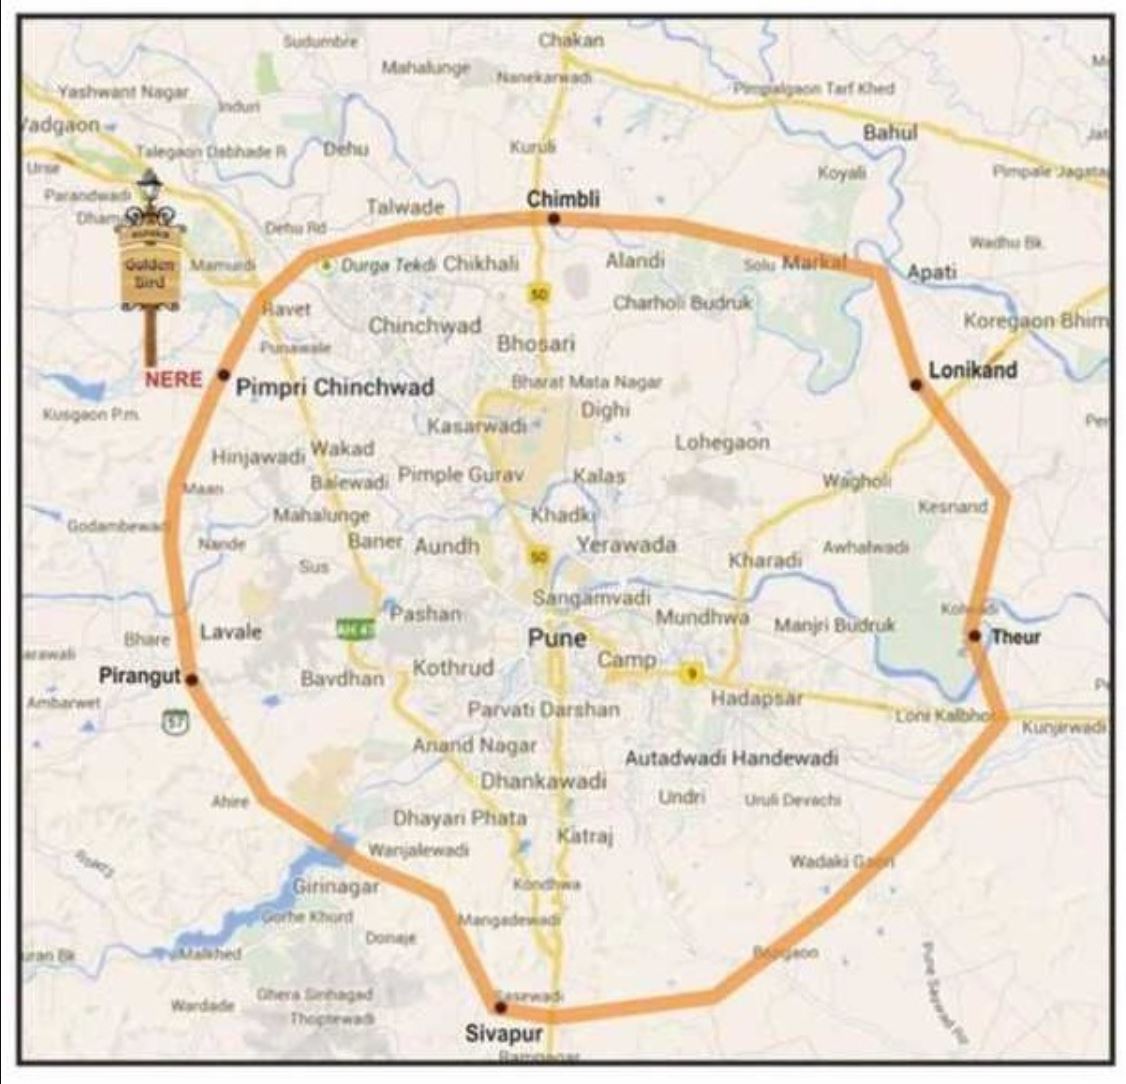 Pune's Outer Ring Road Project Aims for 80% Land Acquisition by February 15  - PUNE.NEWS